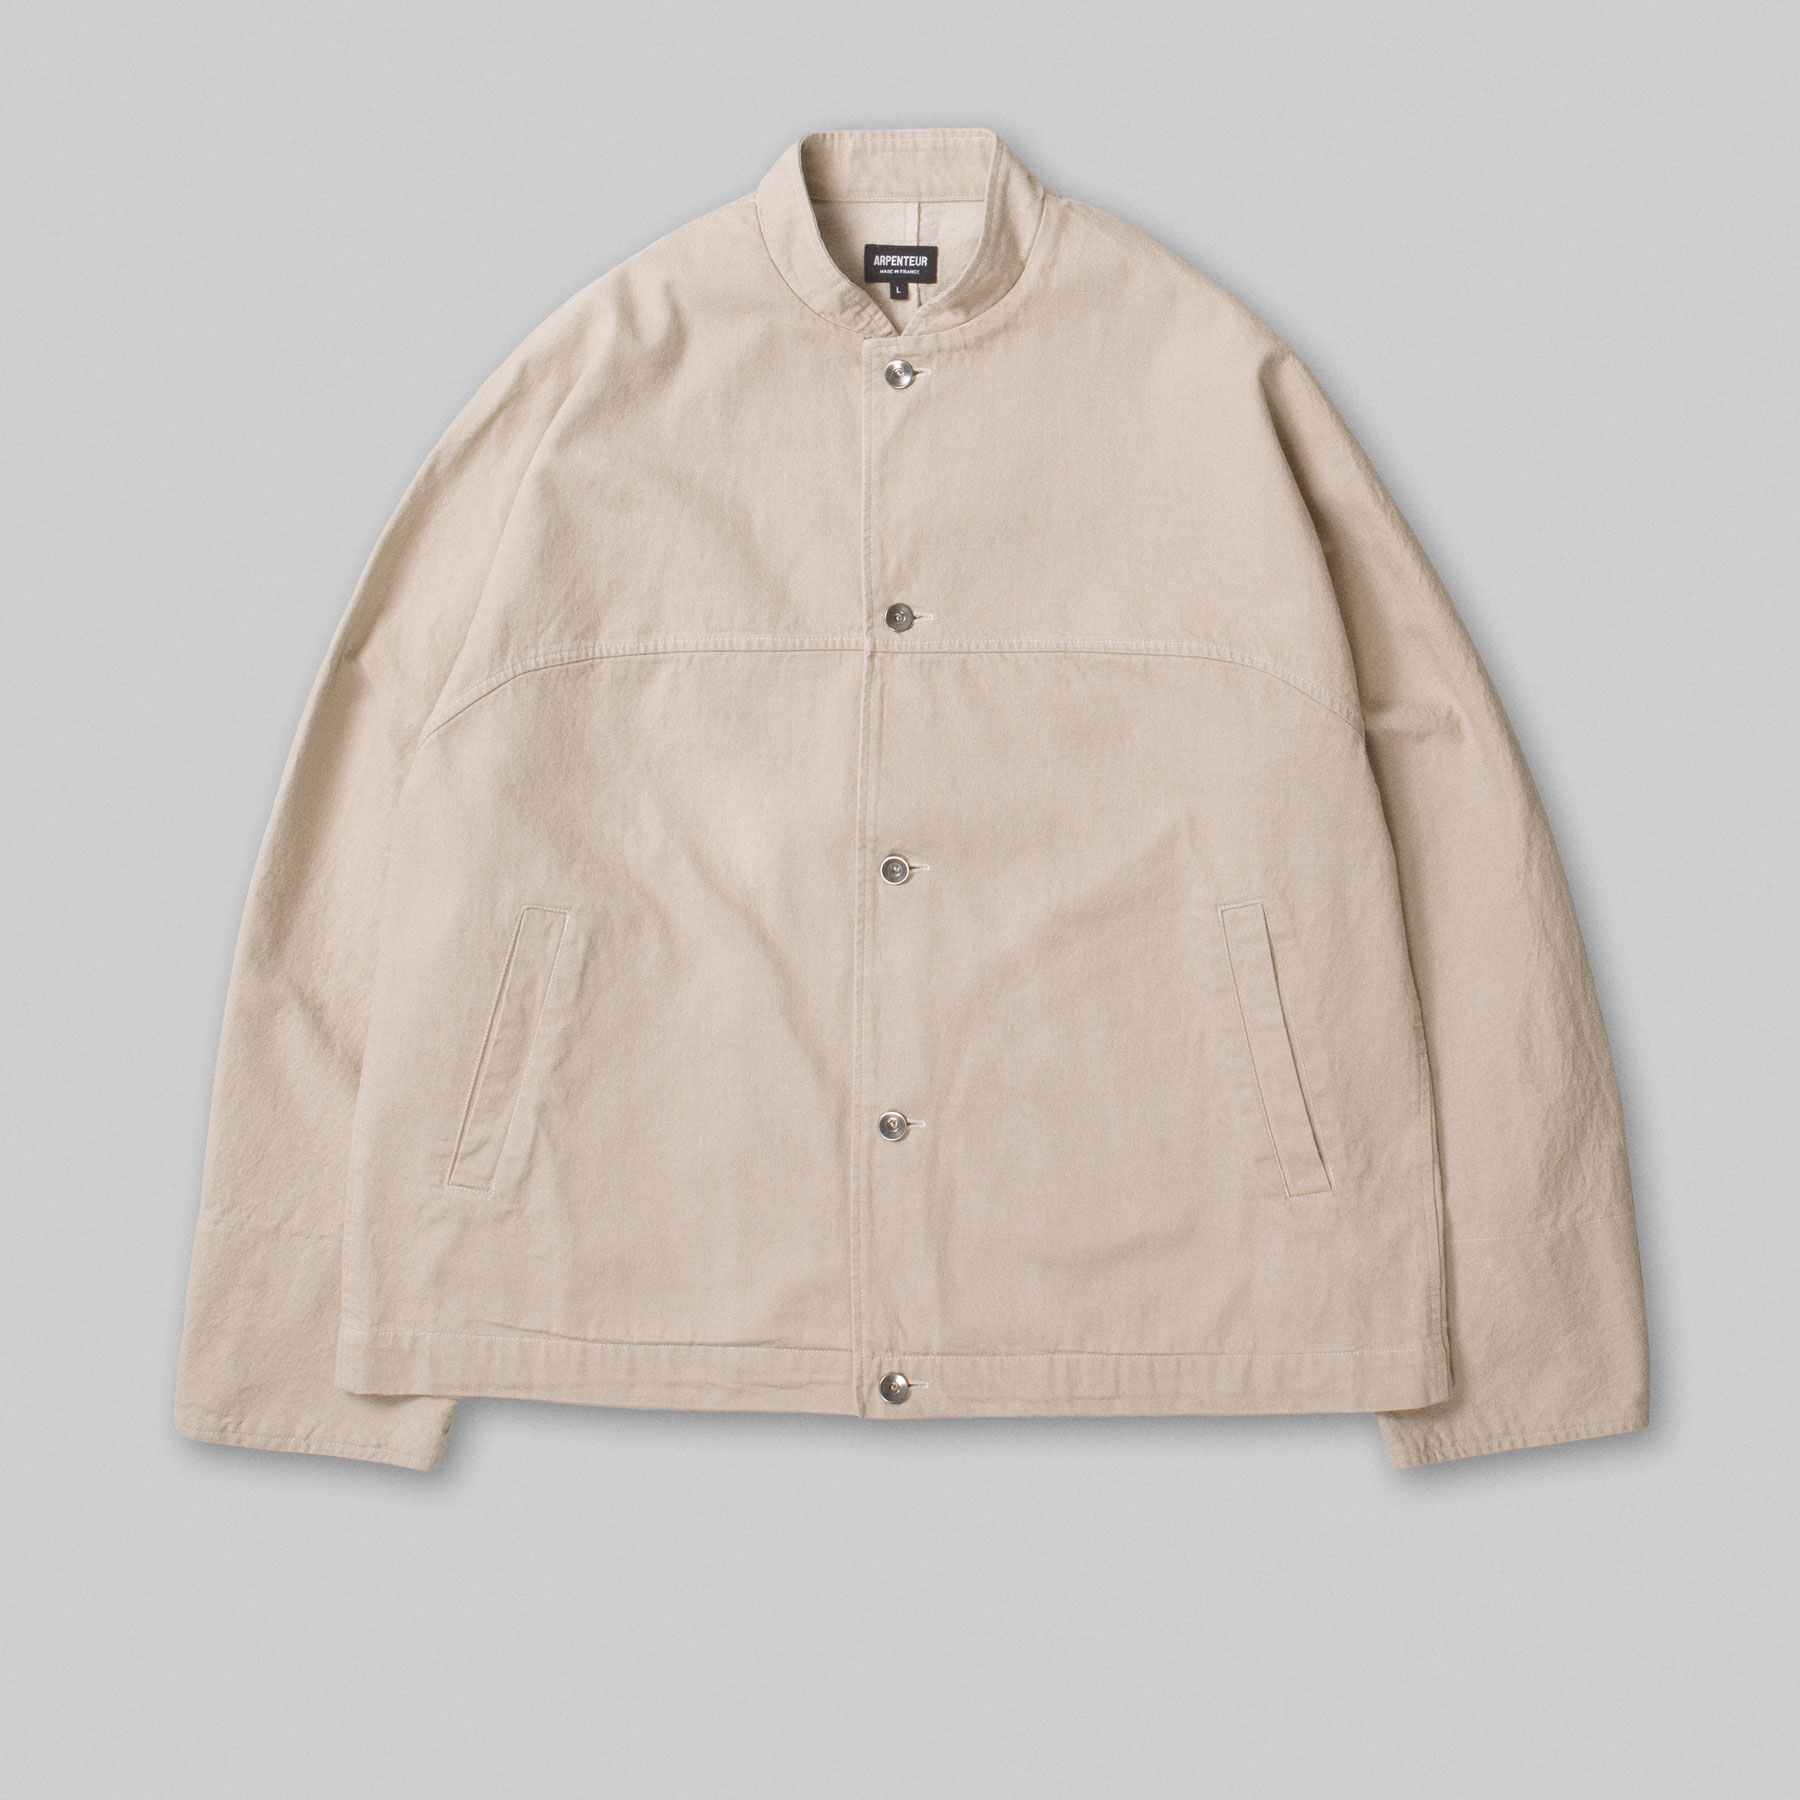 EVO Jacket by Arpenteur in Sand color